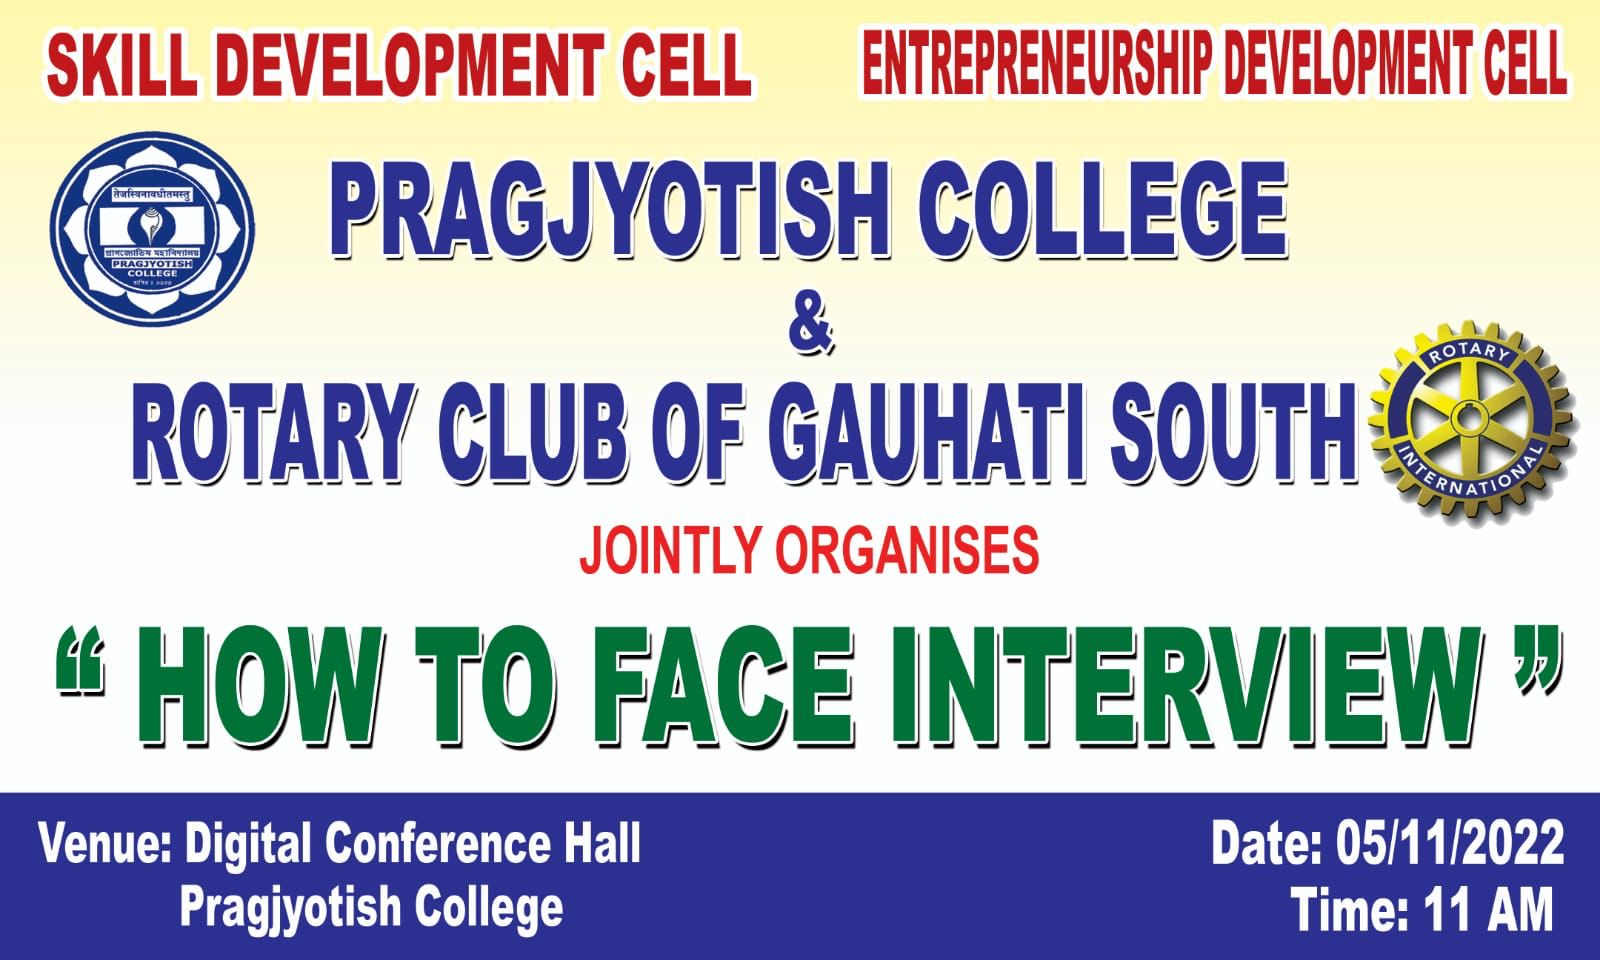 HOW TO FACE AN INTERVIEW at Pragjyotish College